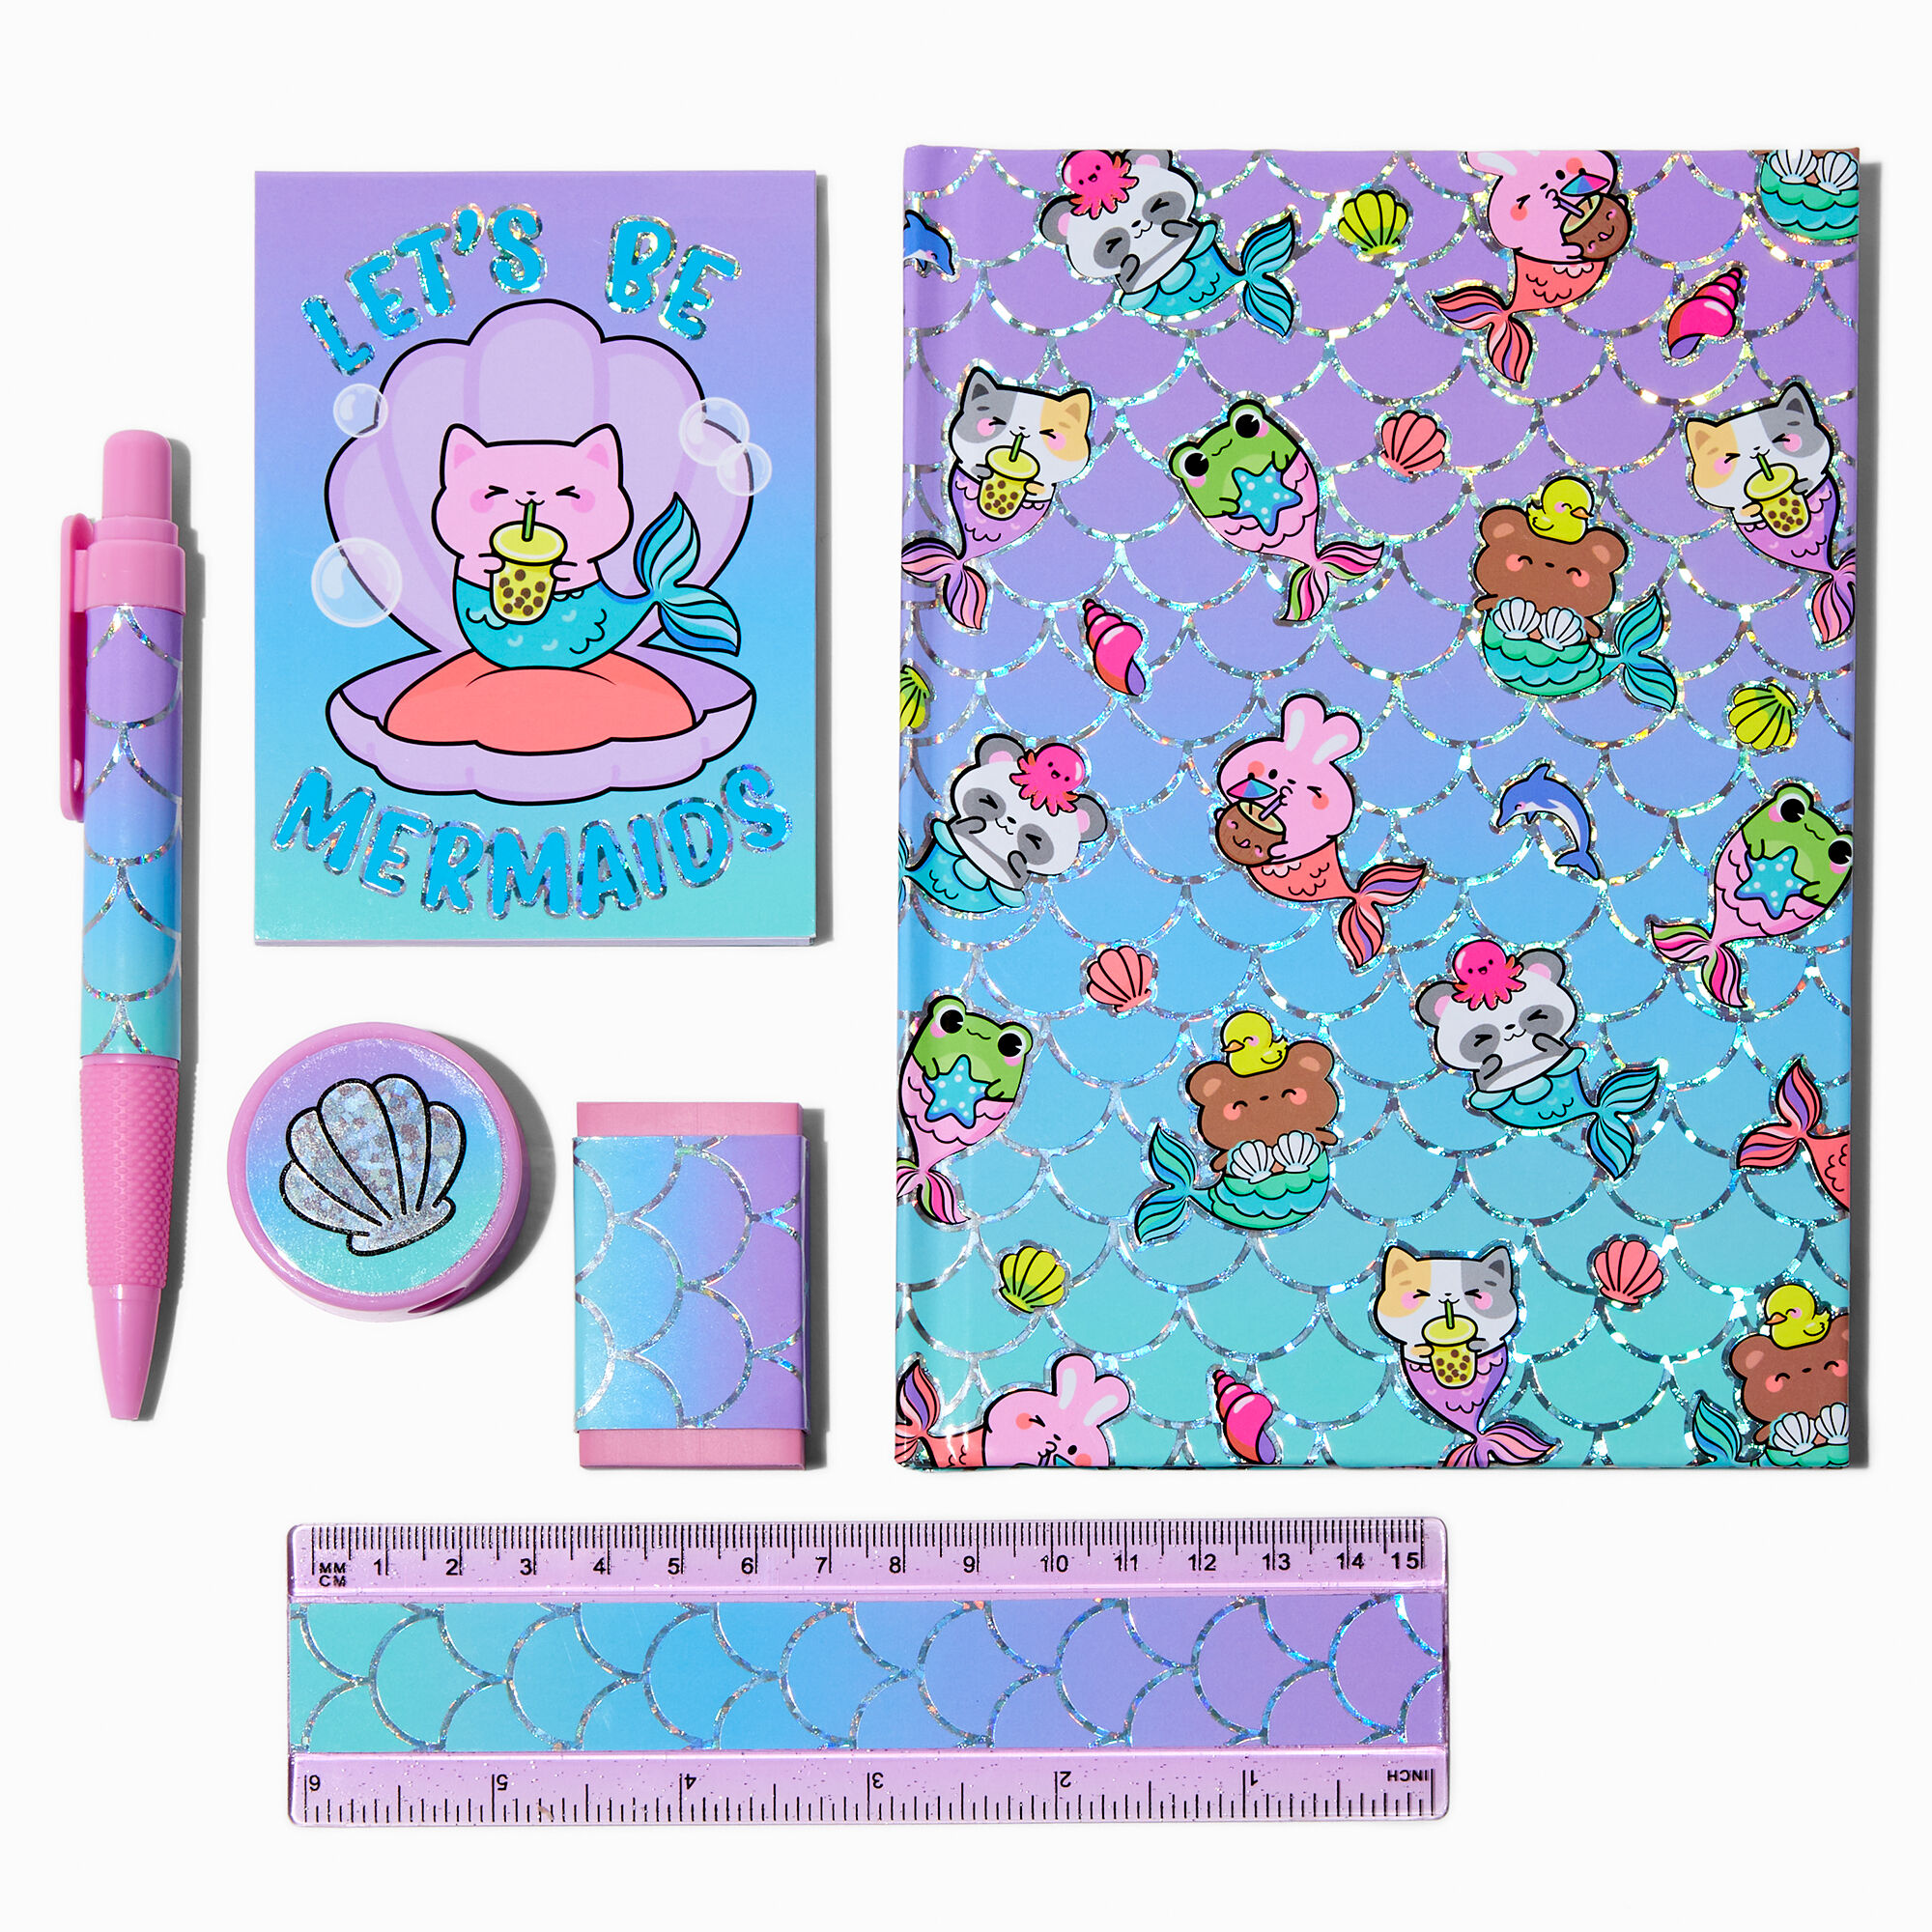 View Claires Critter Mermaid Stationery Set information